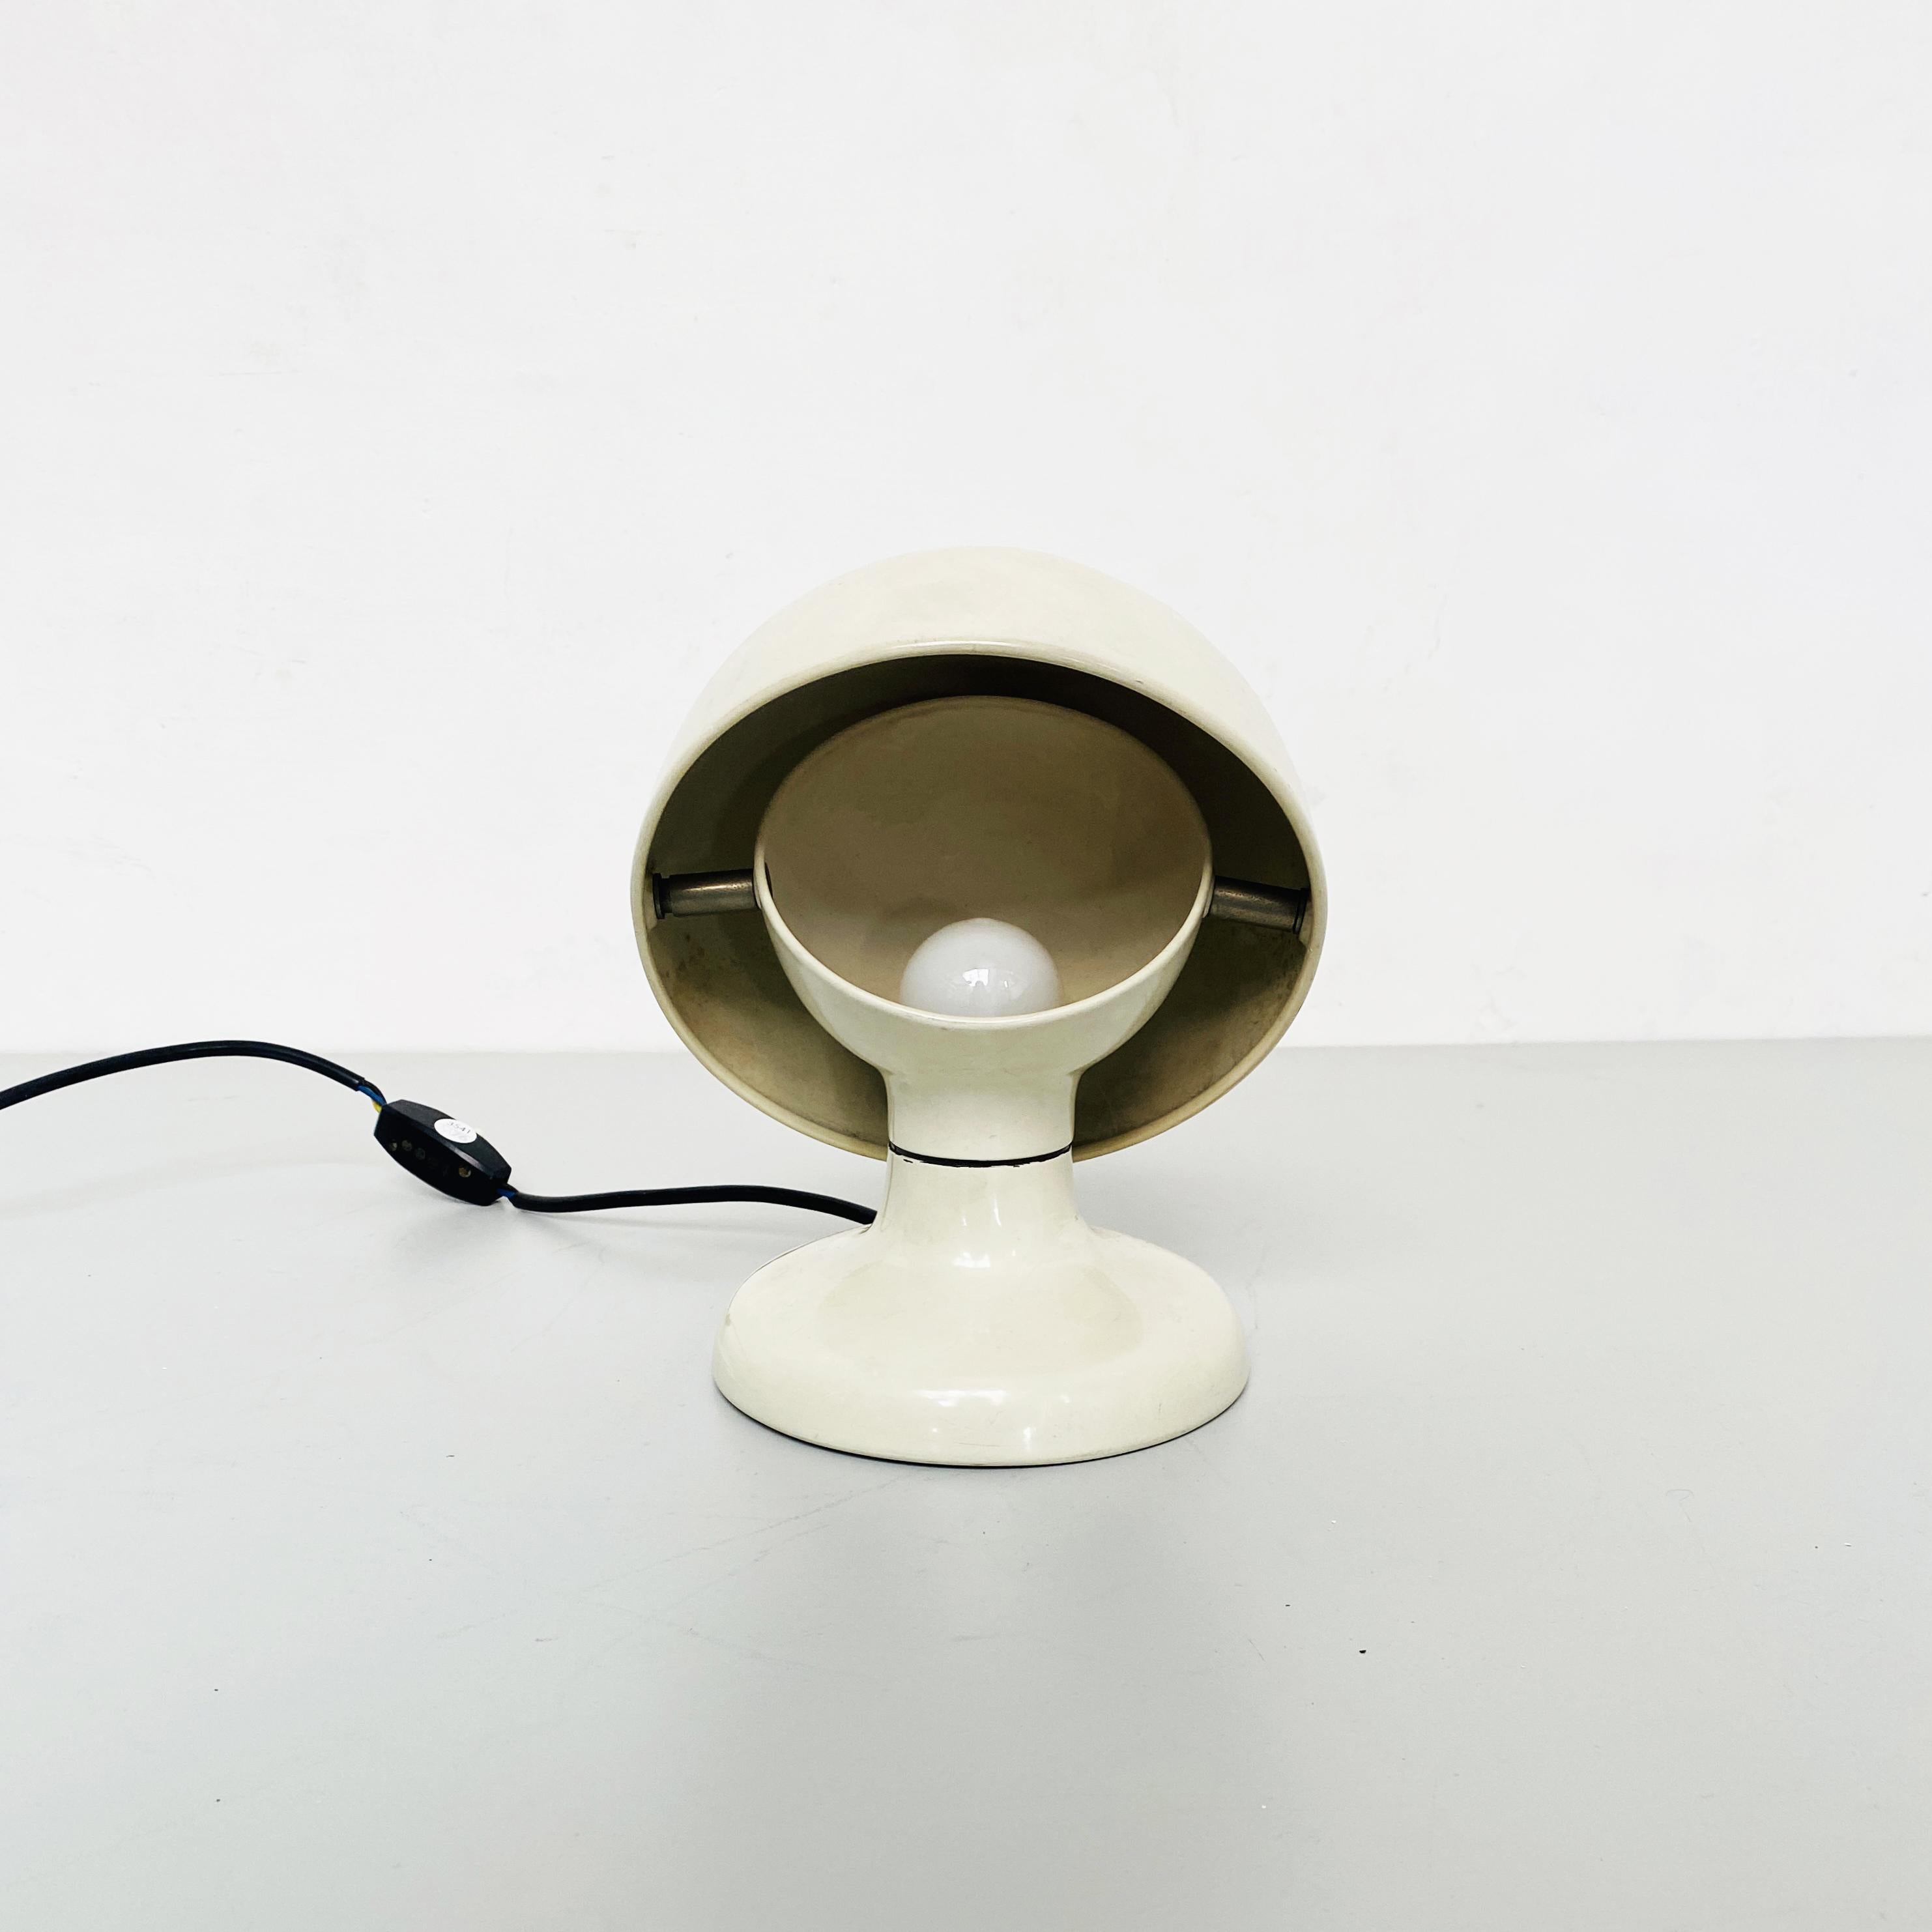 Mid-Century Modern Italian Mid-Century White Metal Jucker Table Lamp by Tobia Scarpa for Flos, 1963 For Sale